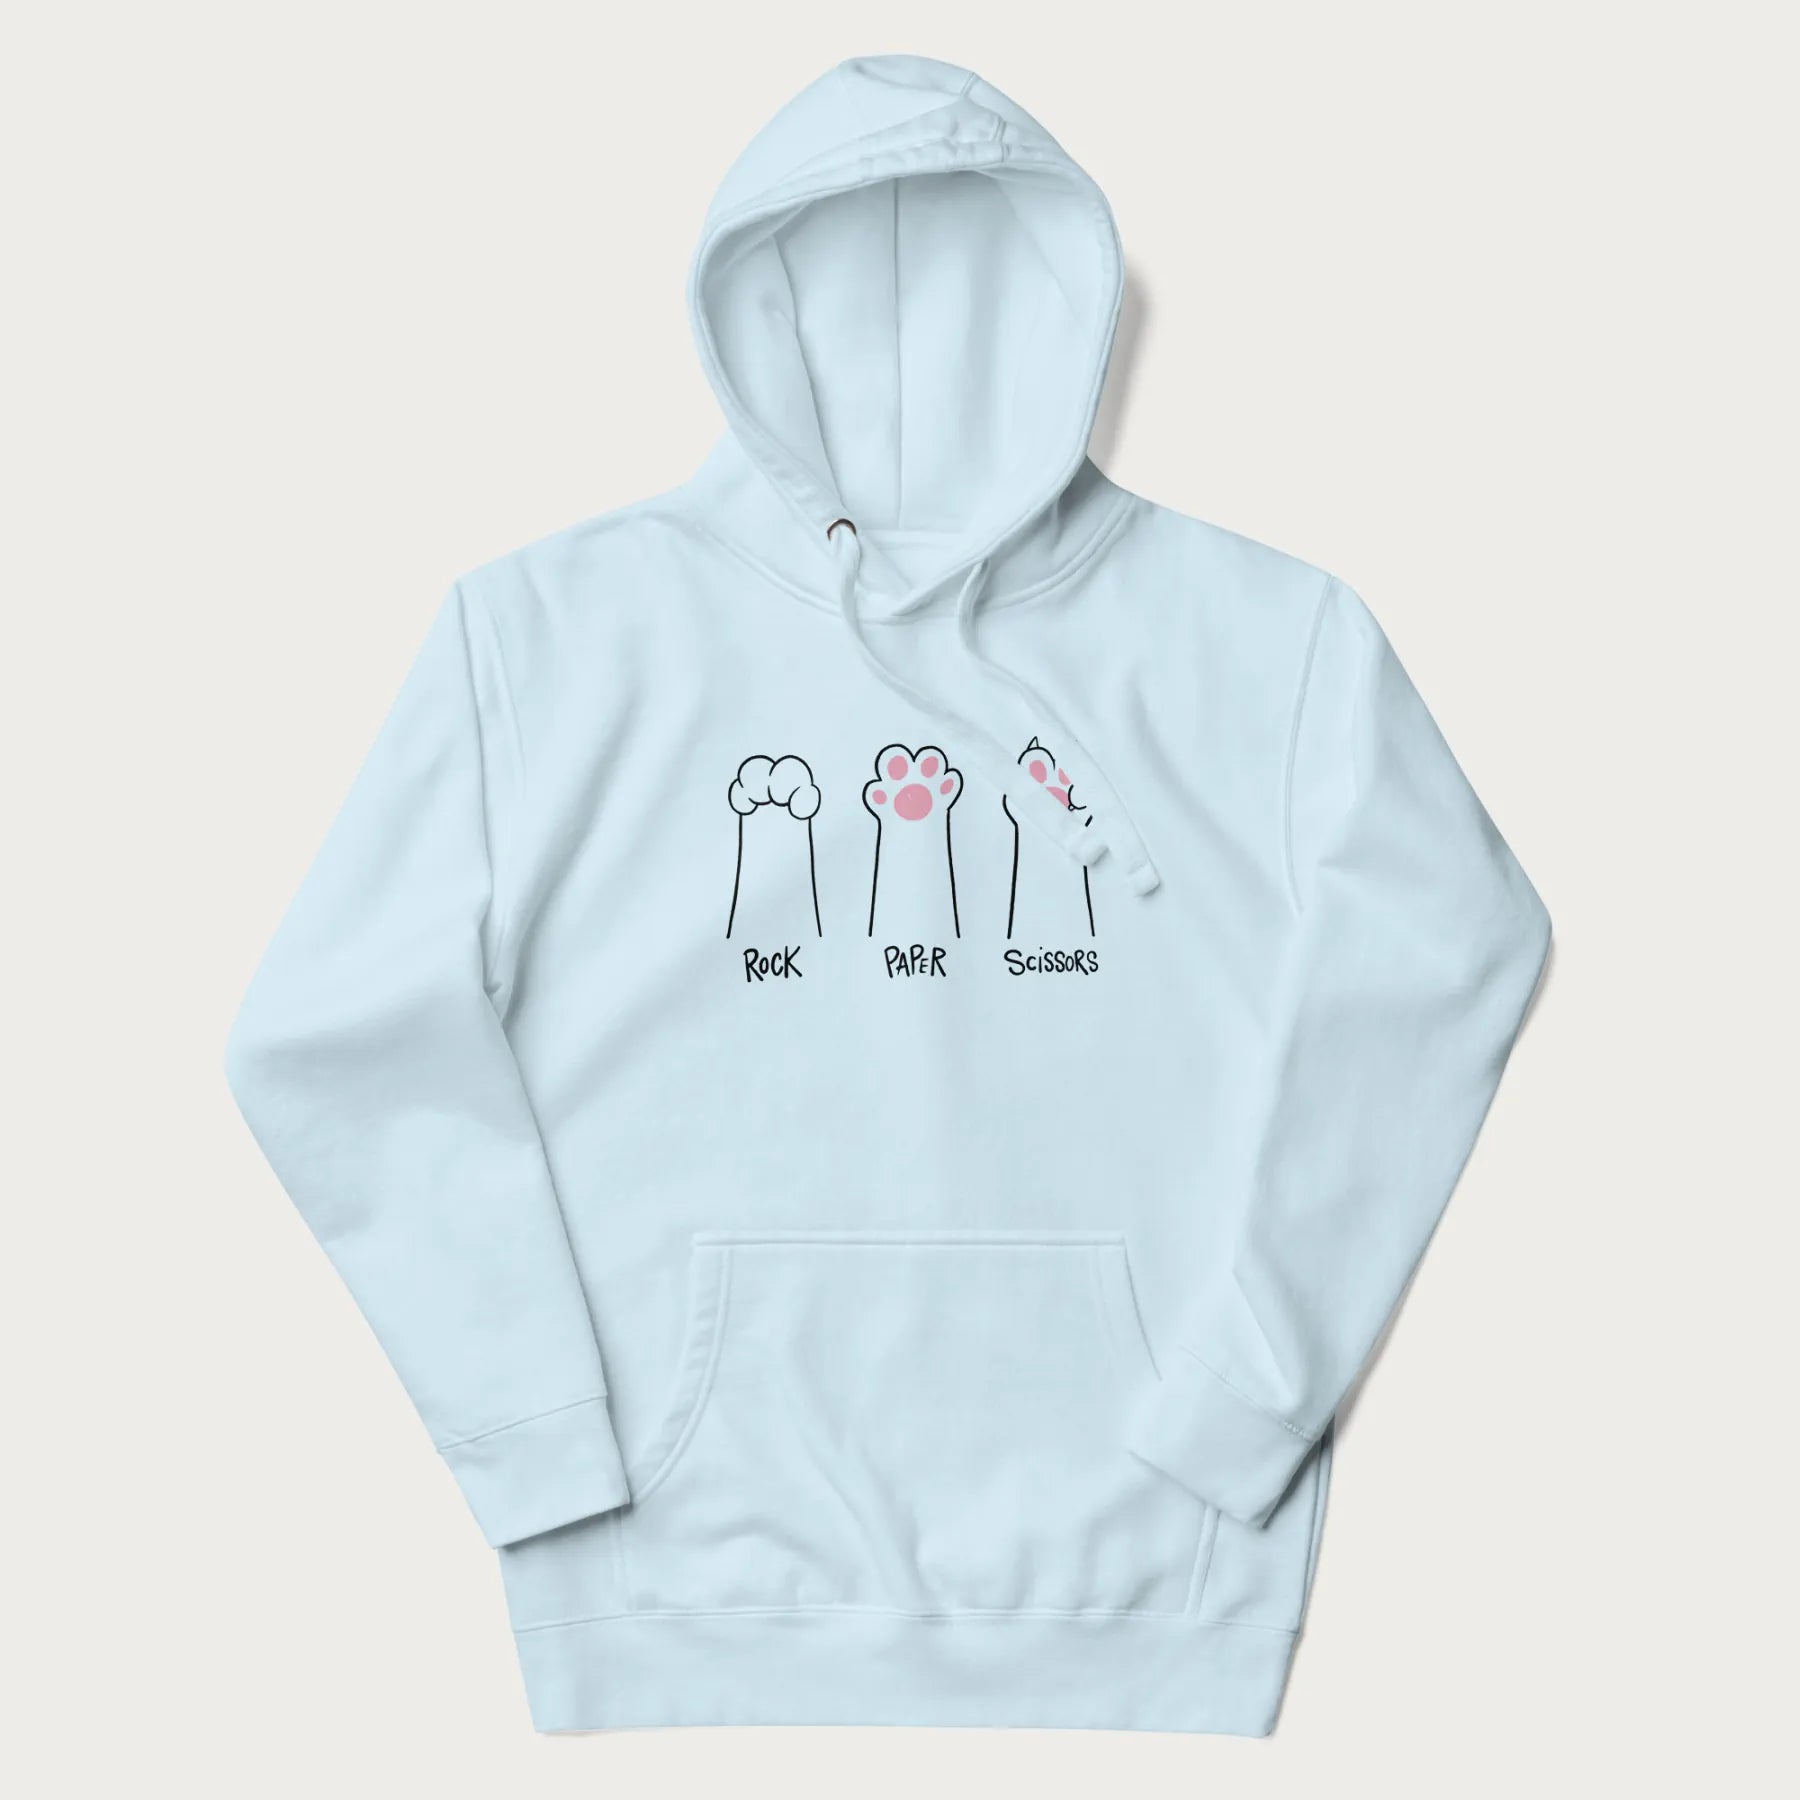 Light blue hoodie with graphic of cat paws playing rock-paper-scissors.